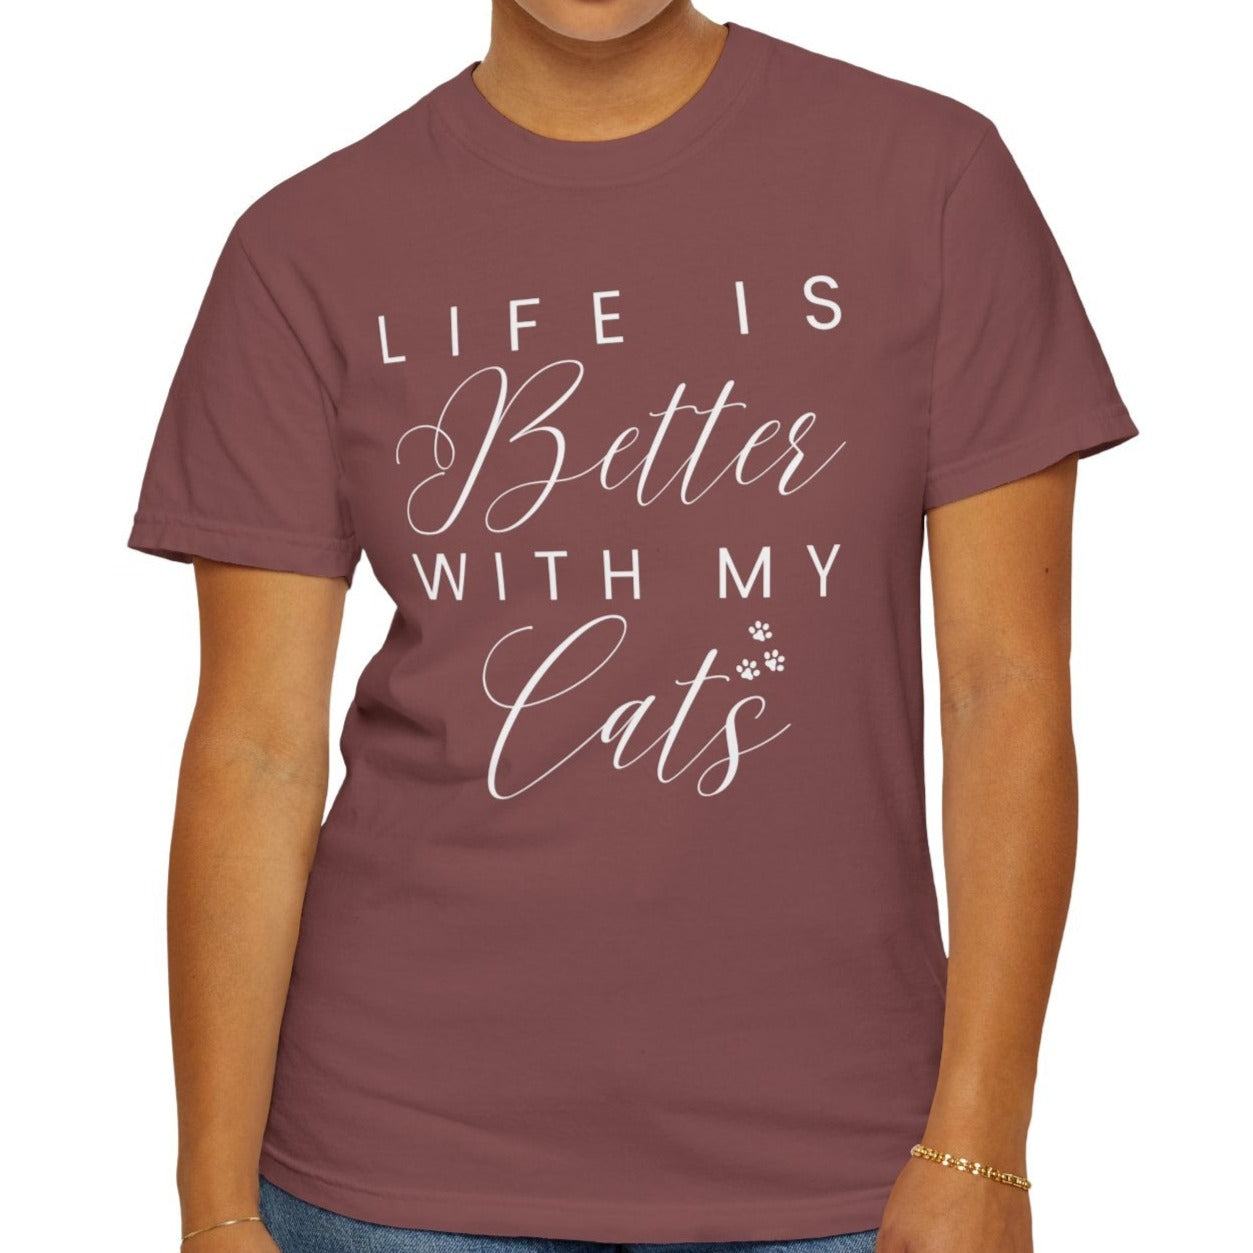 Women's Comfort Colors Tee - Life is Better with My Cats | Soft & Stylish Cat Lover Shirt for Ultimate Comfort | Trendy Short Sleeve Top for Feline Enthusiasts | Perfect Gift for Cat Moms | Sizes S-XXL